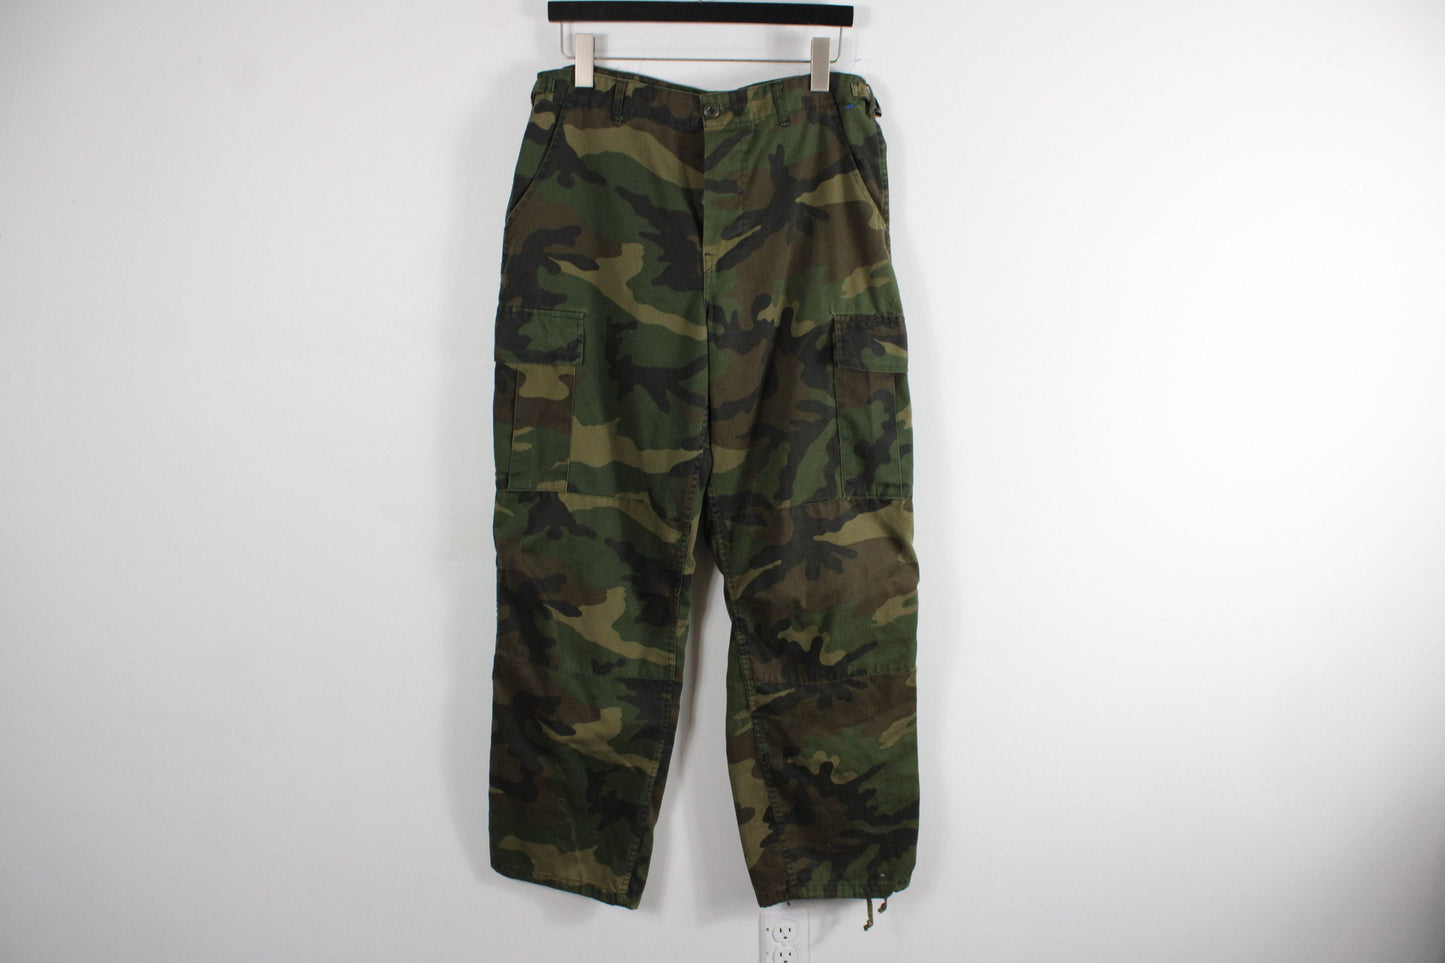 Vintage Camo Pants / Military Green Camouflage Combat Trouser / 90s Army Fatigue / 80s Surplus / 34 x 31